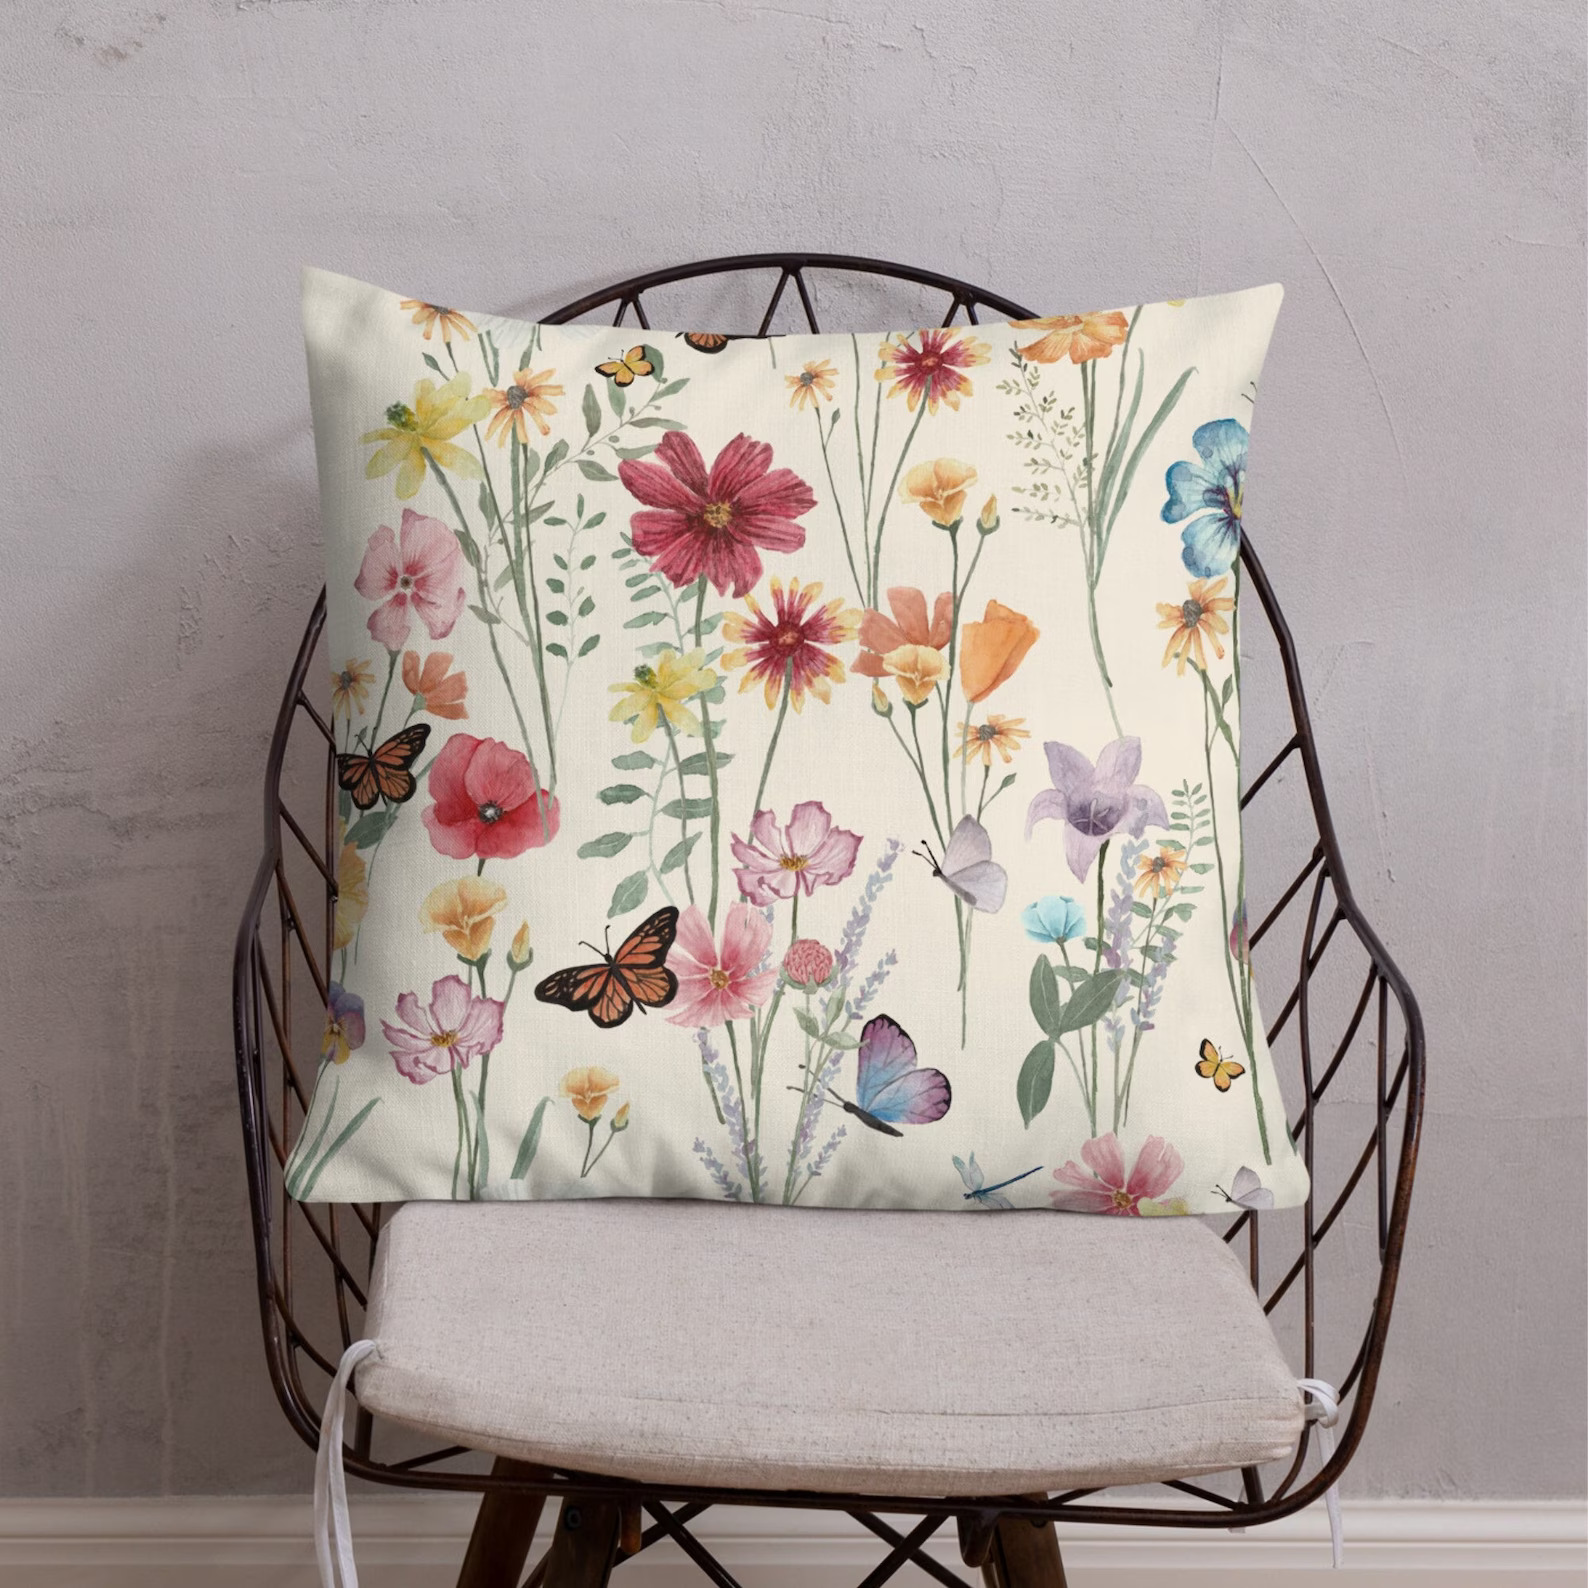 15 Delightful Floral Summer Pillow Patterns for a Blooming Décor